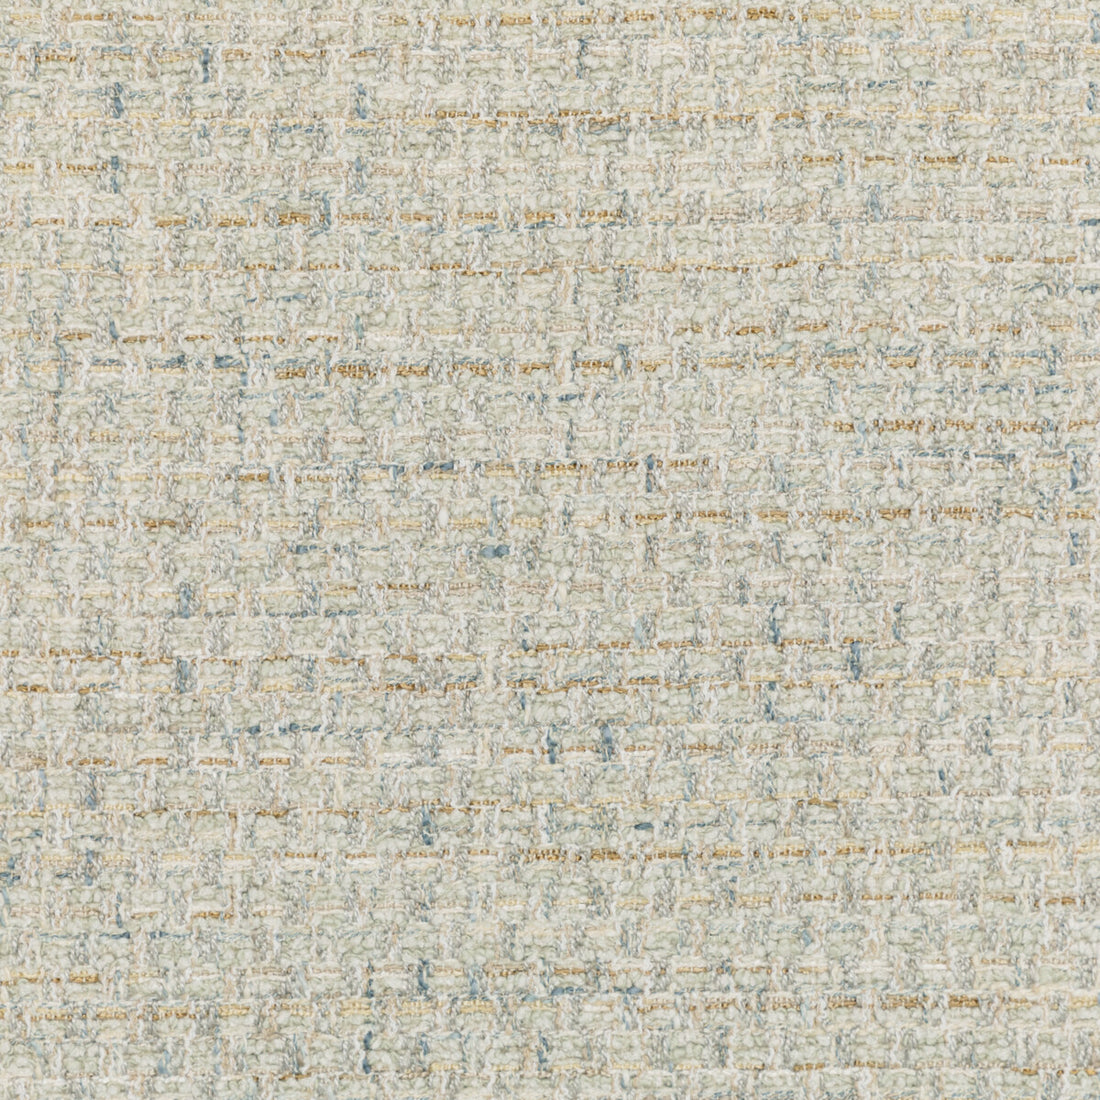 Kravet Couture fabric in 36610-1611 color - pattern 36610.1611.0 - by Kravet Couture in the Mabley Handler collection